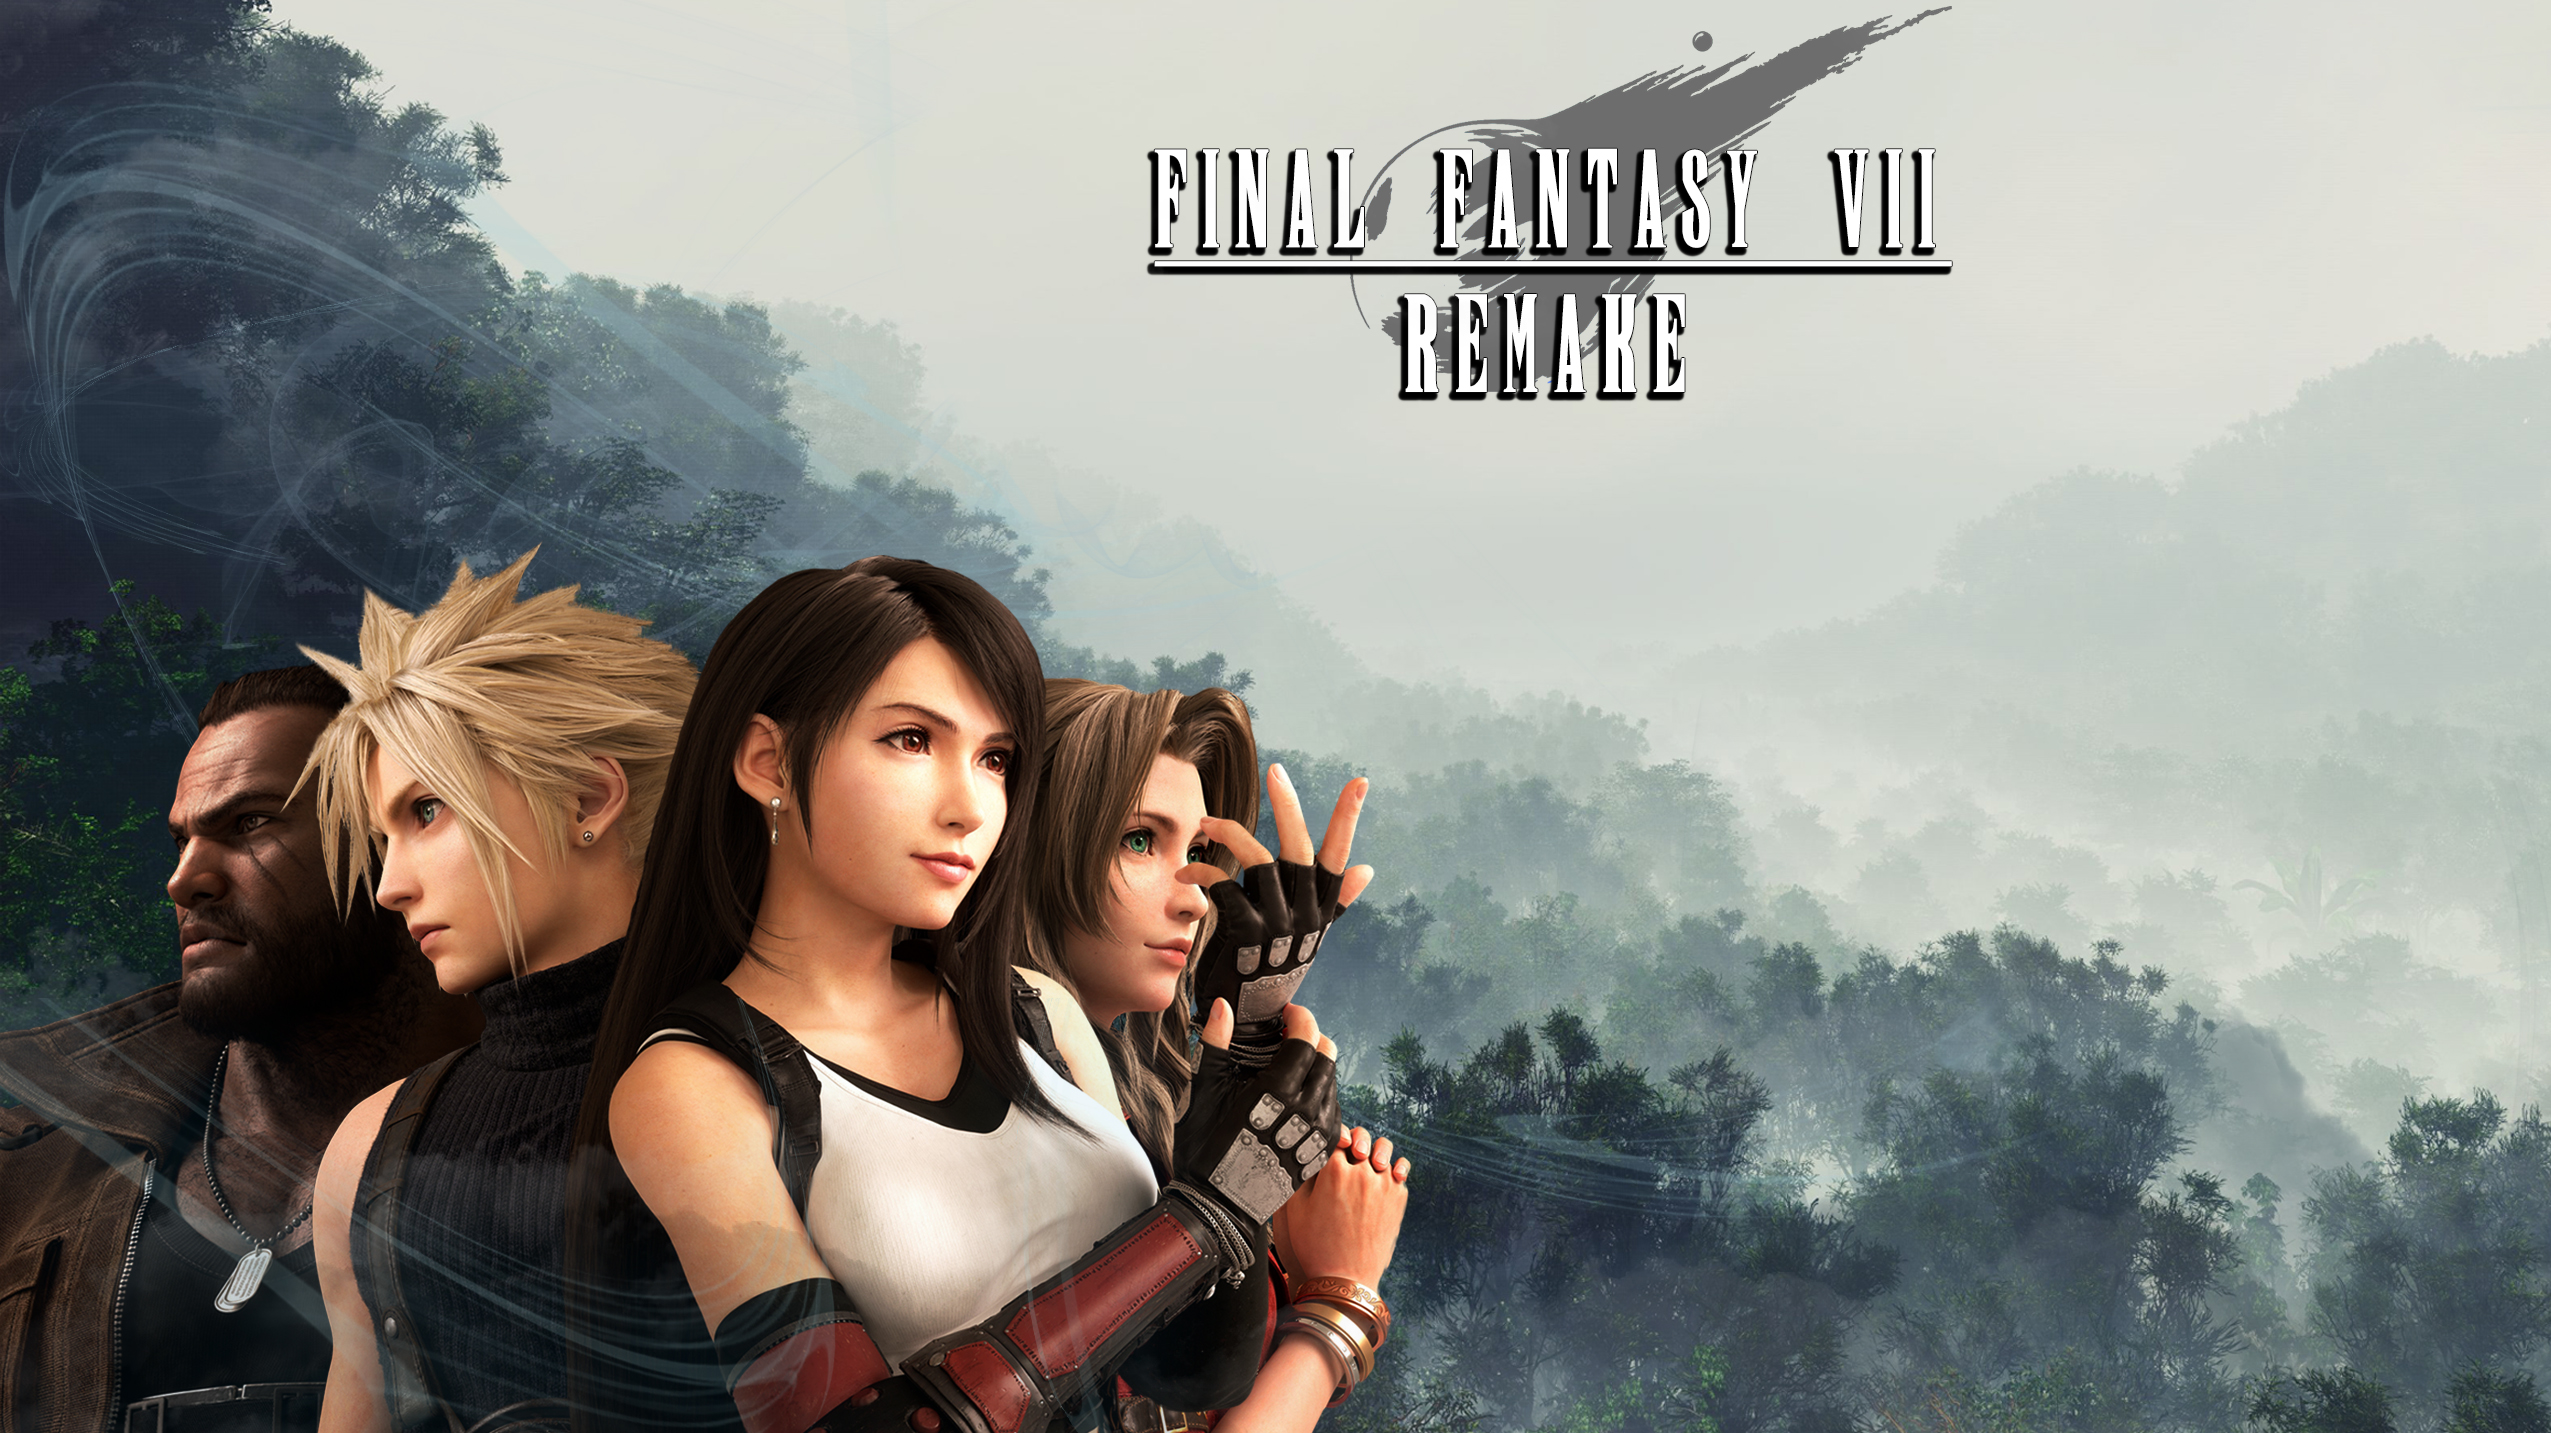 General 2551x1433 Final Fantasy VII Final Fantasy VII: Remake Cloud Strife Tifa Lockhart Aerith Gainsborough Barret Wallace Lifestream forest mist video games Square Enix video game characters